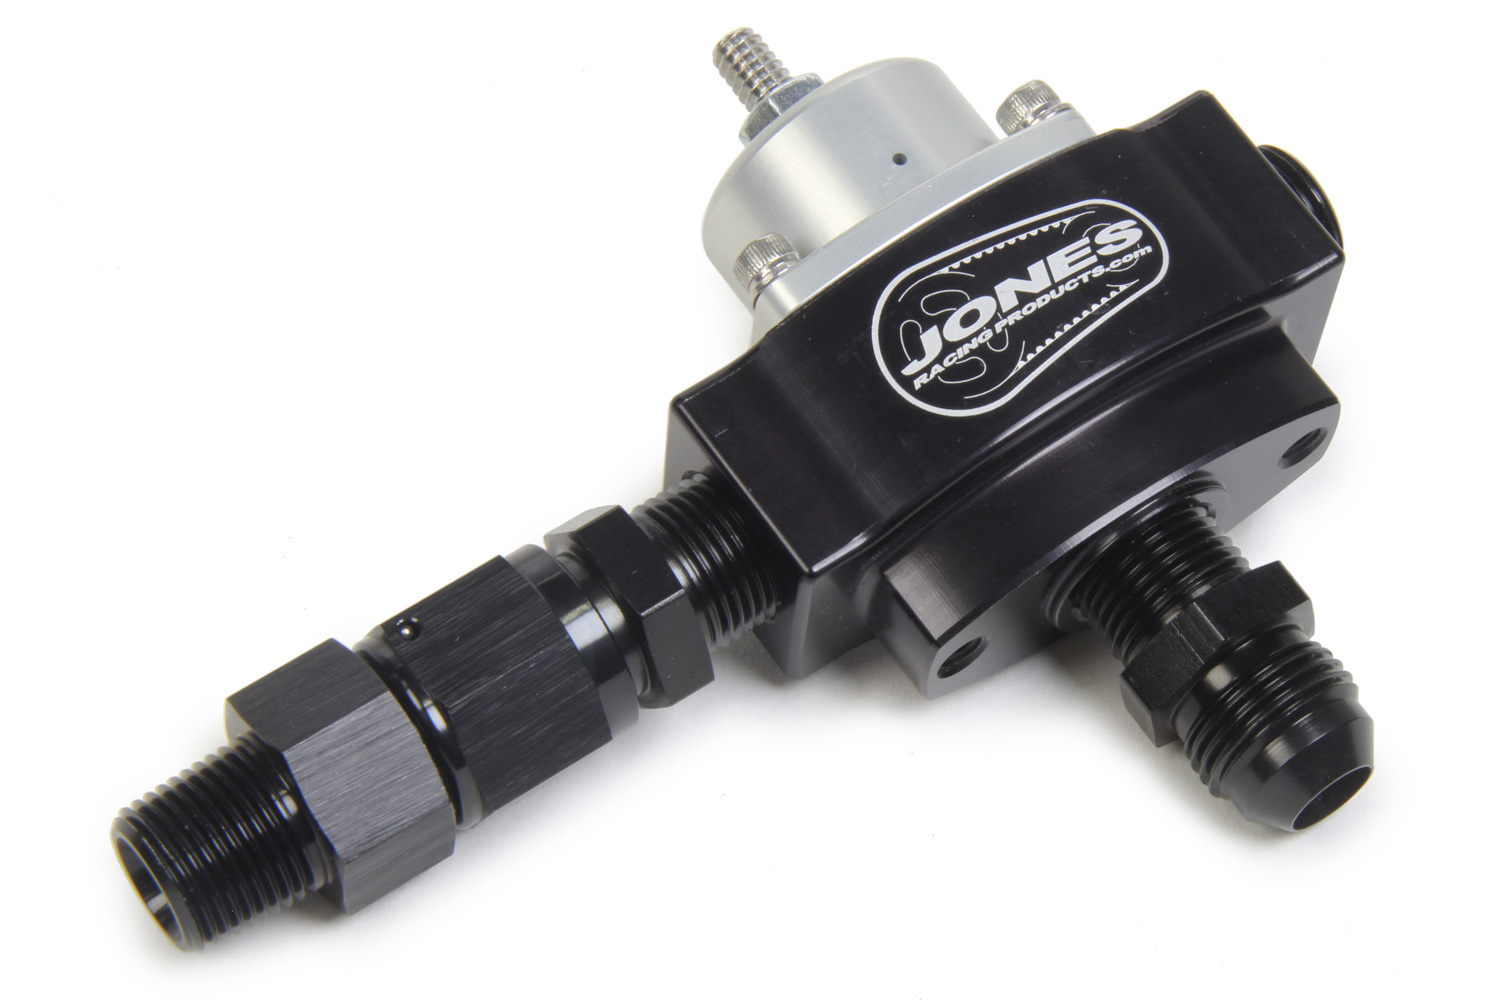 Jones Racing Products FP-8009-R2 Fuel Pressure Regulator, HP Billet, 4.5 to 9 psi, In-Line, 3/8 in NPT Inlet, 3/8 in NPT Outlet, 3/8 in NPT Bypass, 1/8 in NPT Port, Aluminum, Black Anodized, E85 / Gas / Methanol, Each